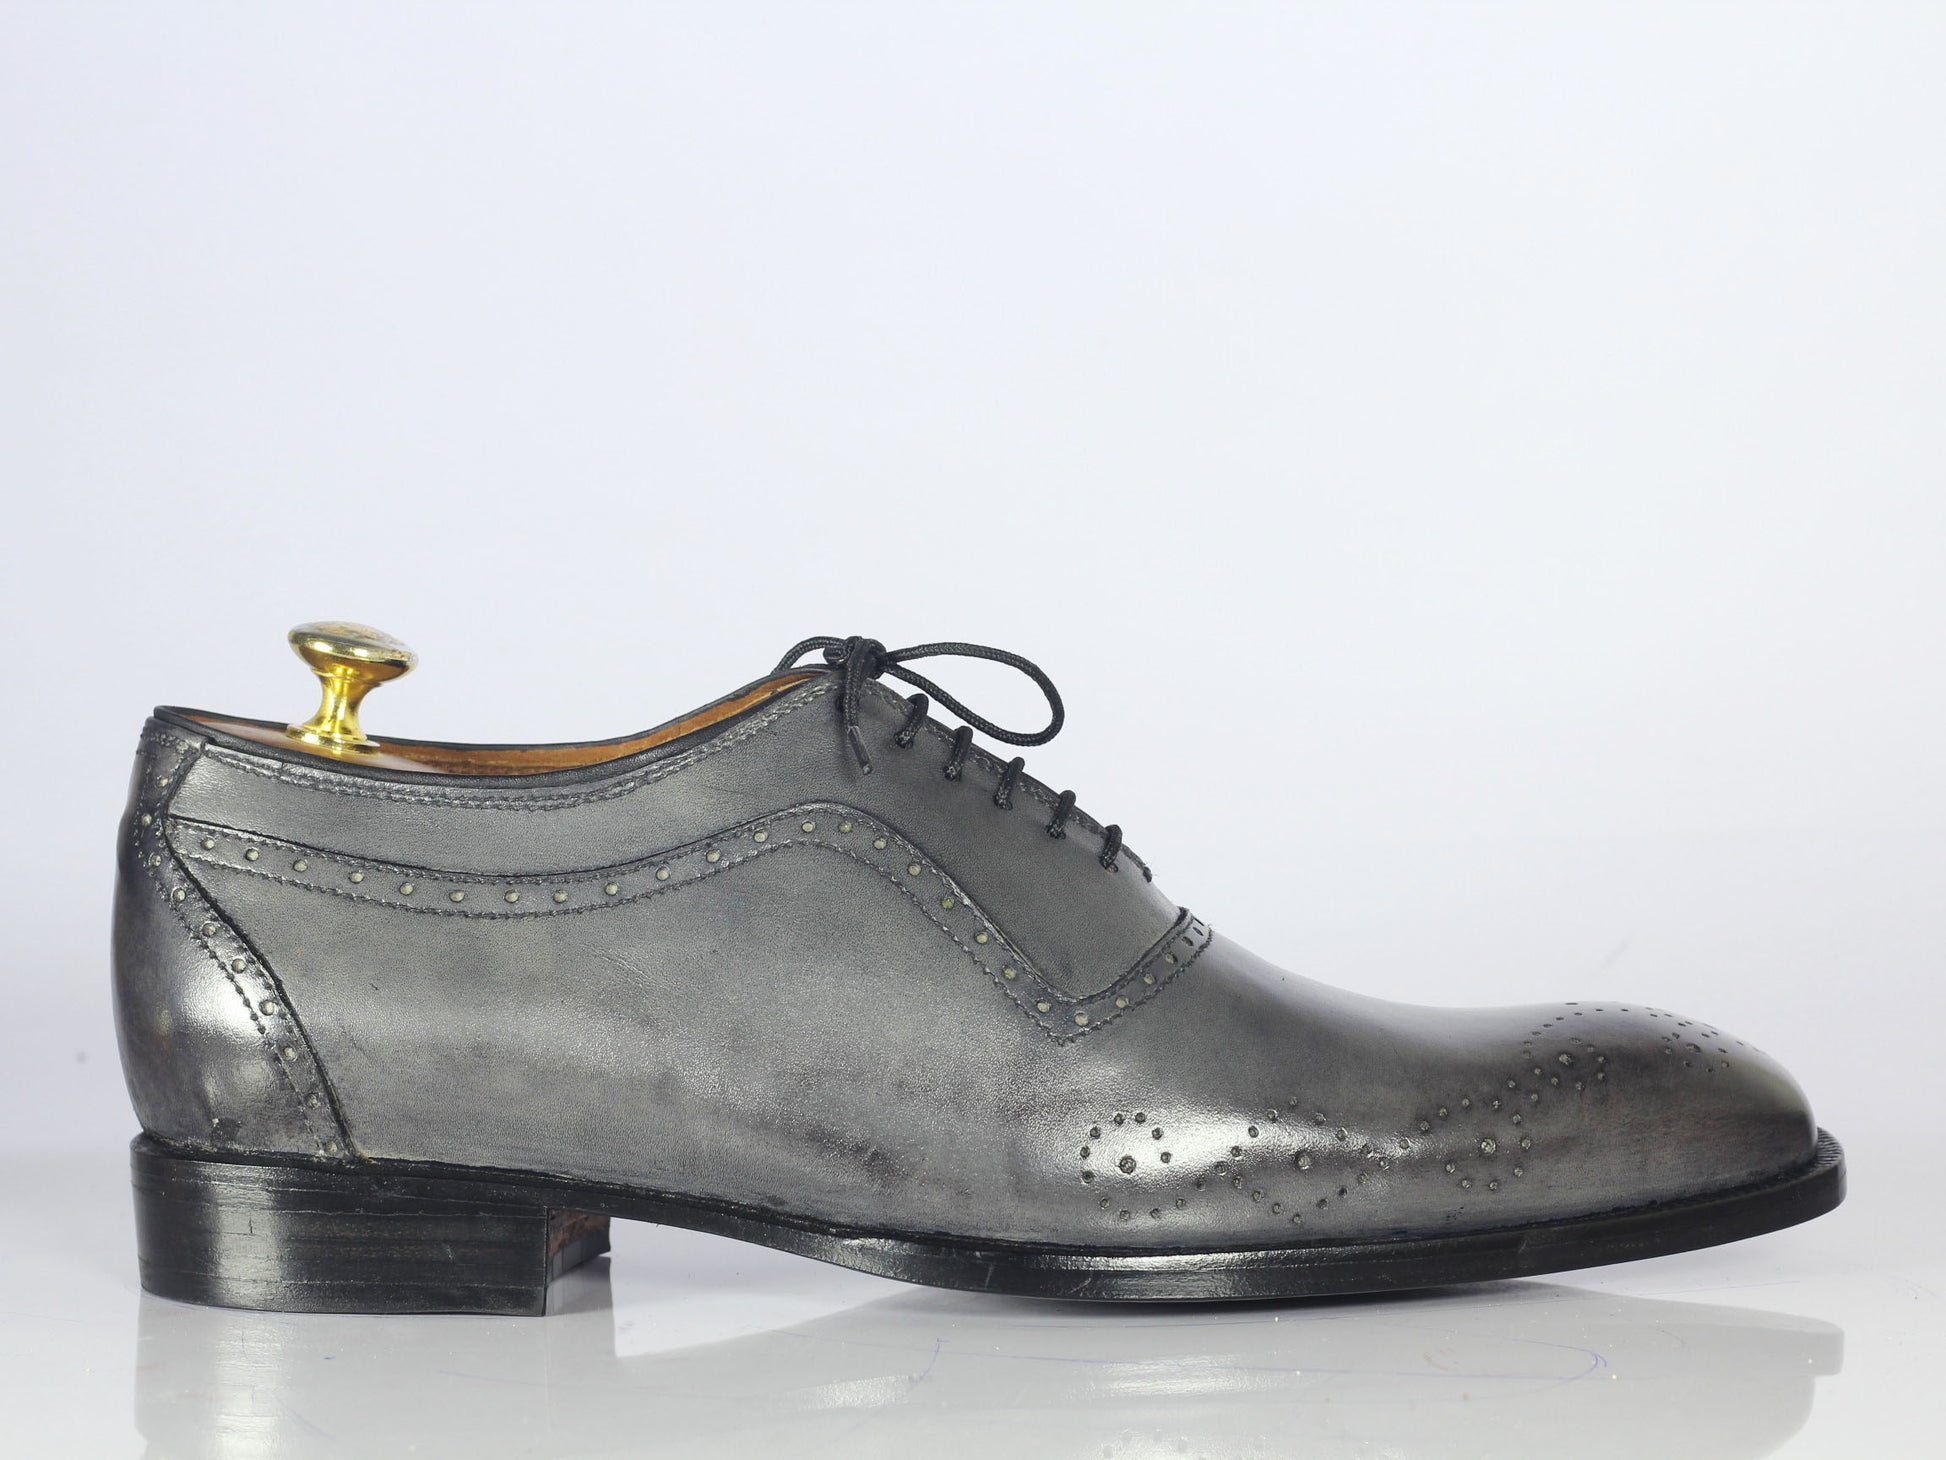 Handmade Men's Gray Leather Wing Tip Brogue Shoe, Men Lace Up Dress Formal Shoes - theleathersouq